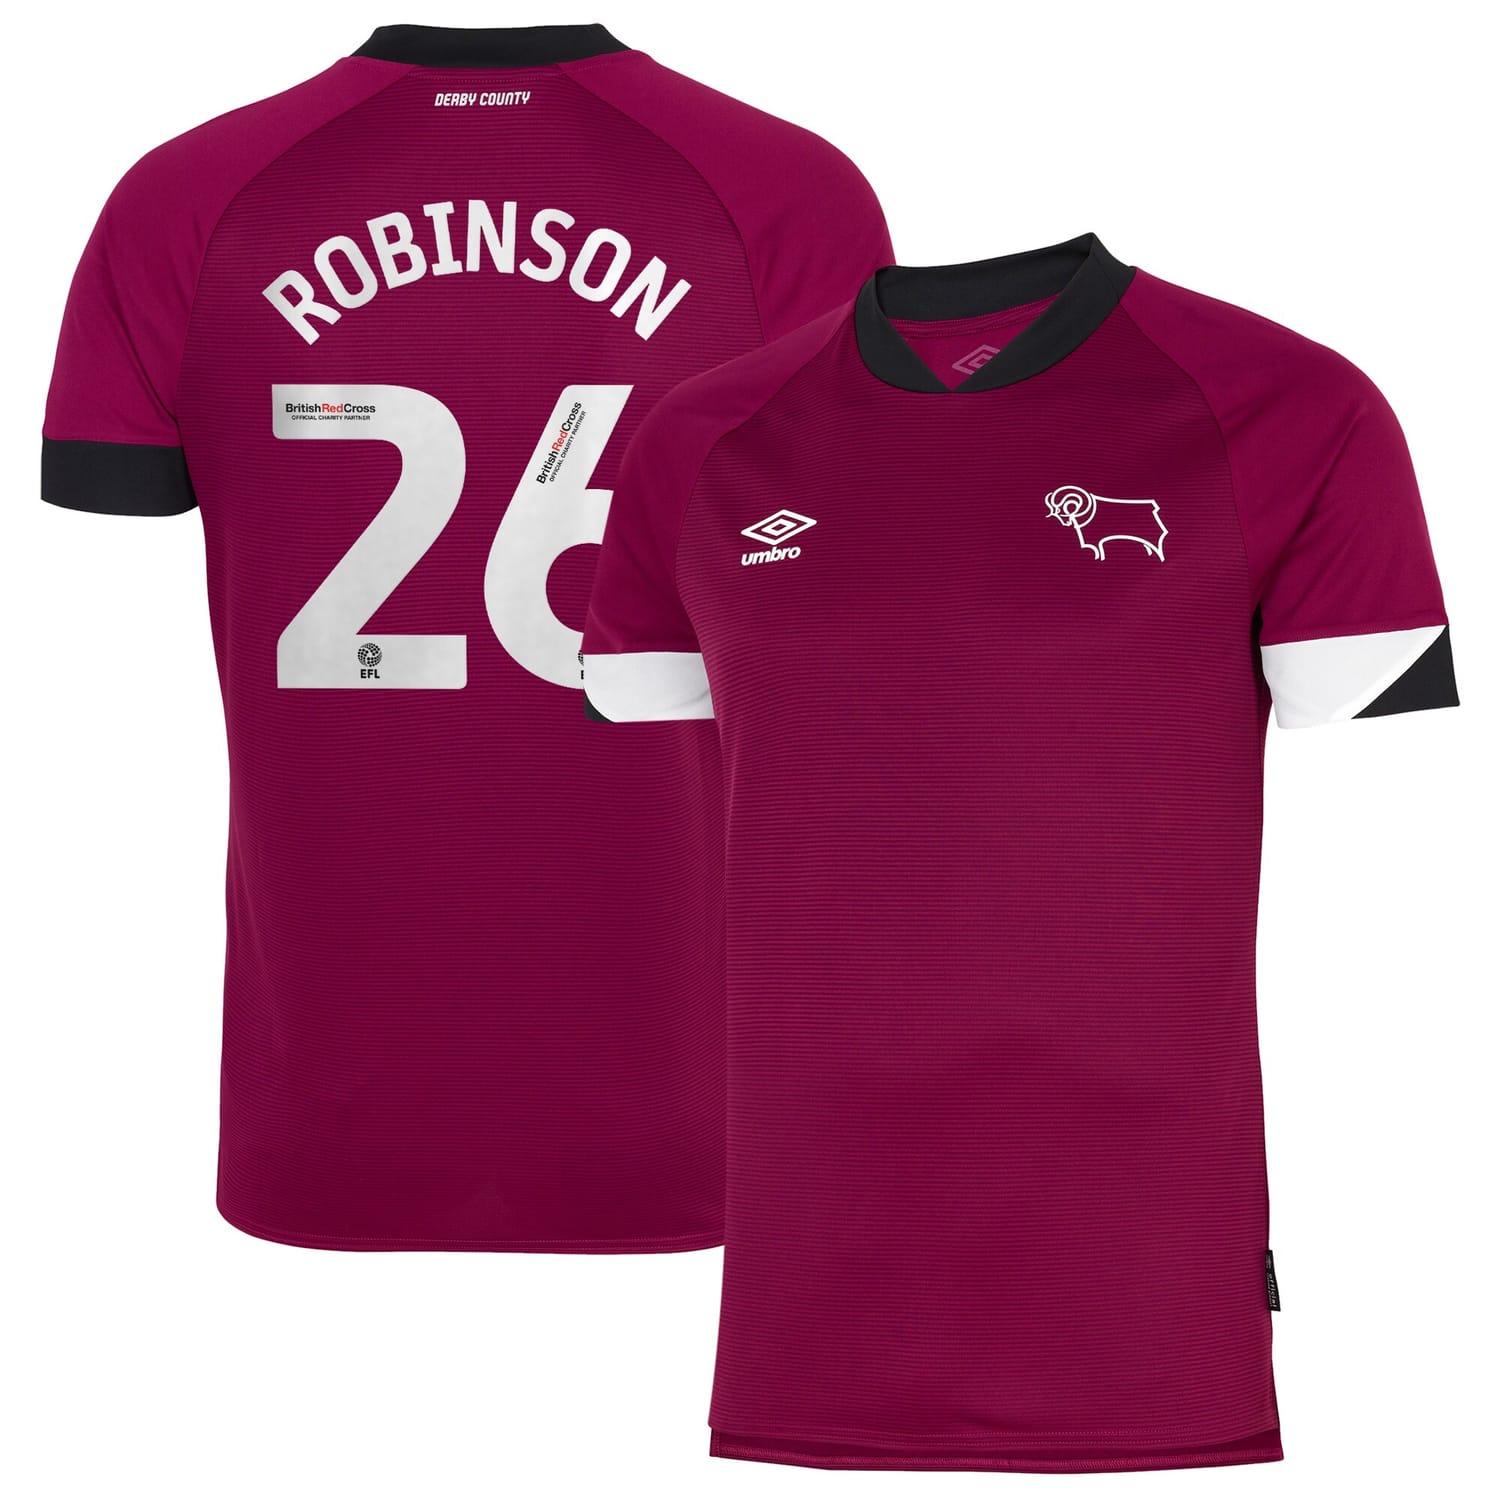 EFL League One Derby County Third Jersey Shirt 2022-23 player Robinson 26 printing for Men